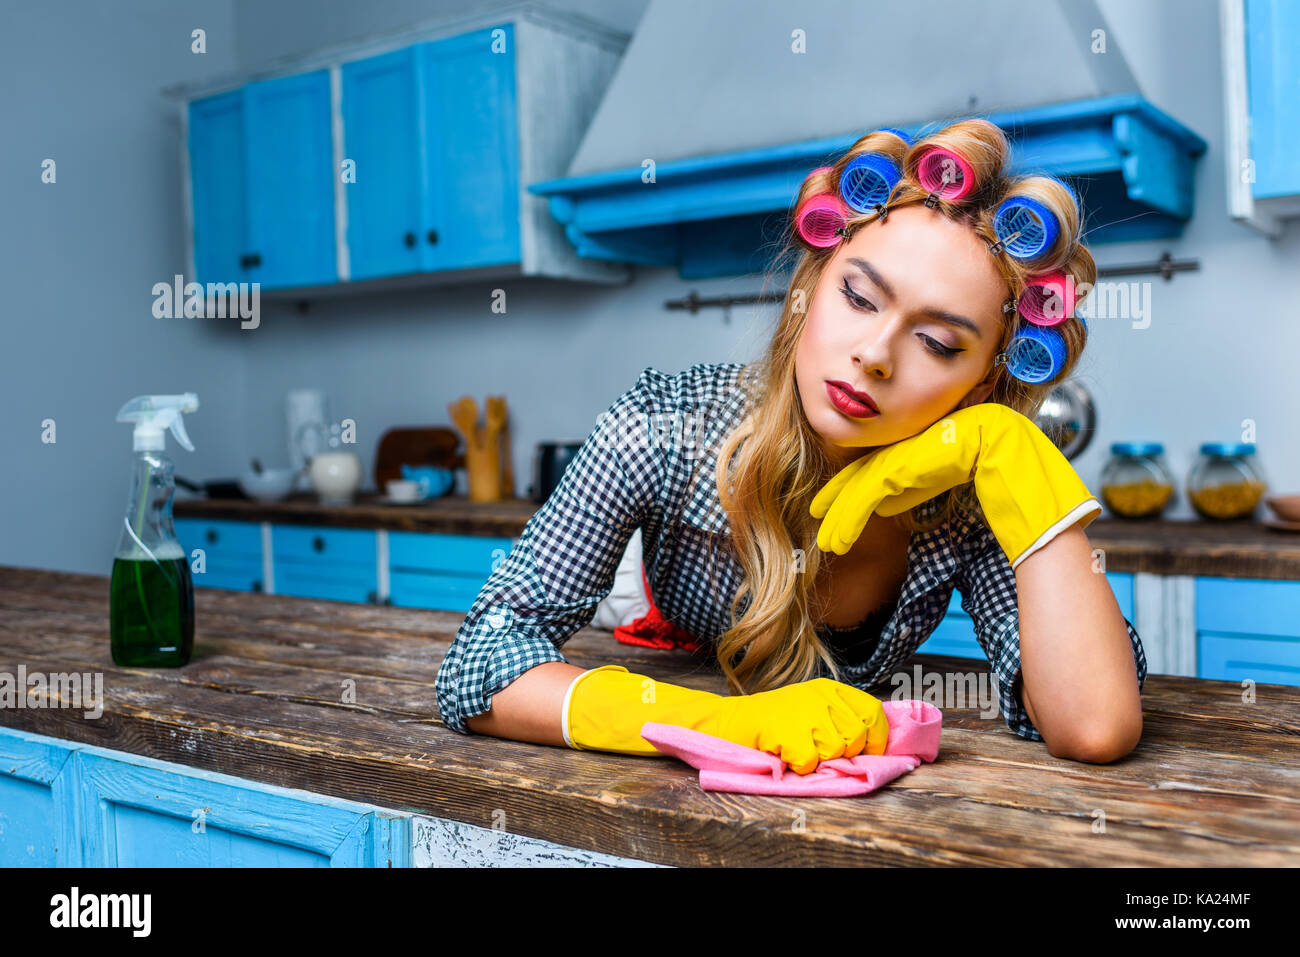 housewife cleaning tabletop Stock Photo